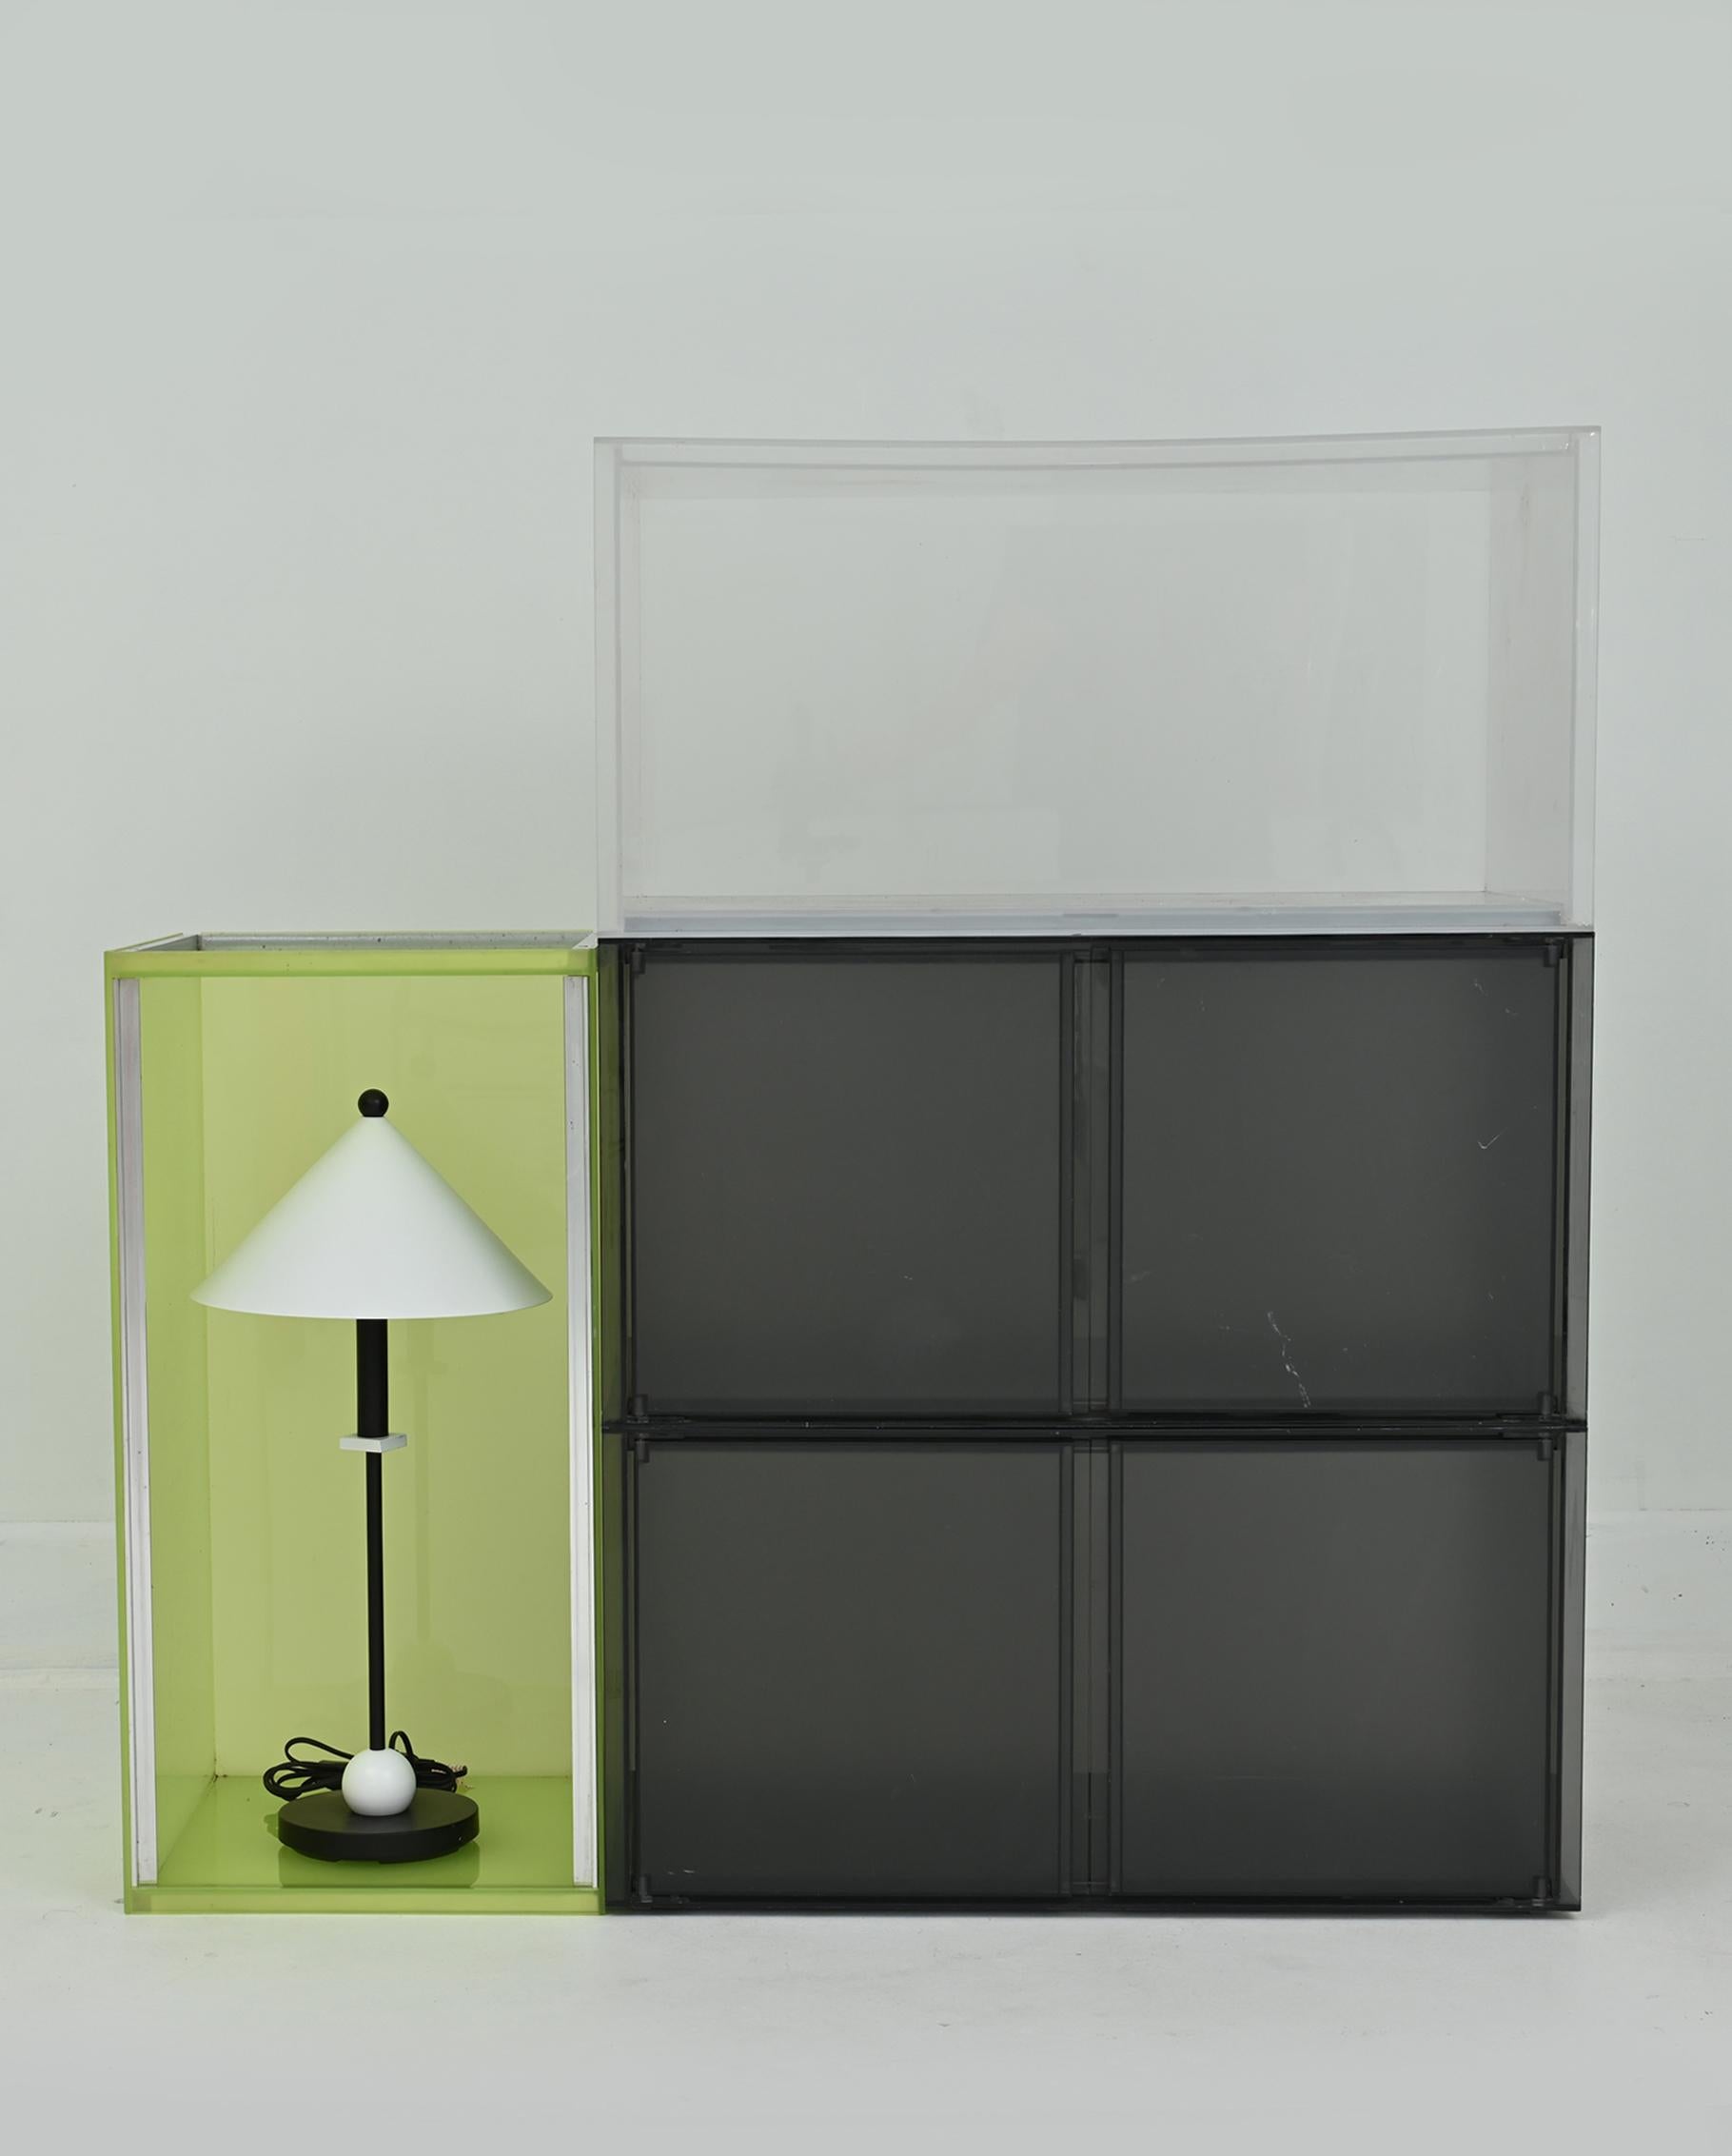 1990s Acrylic Resin and Steel “One” Wall Unit by Piero Lissoni for Kartell For Sale 5